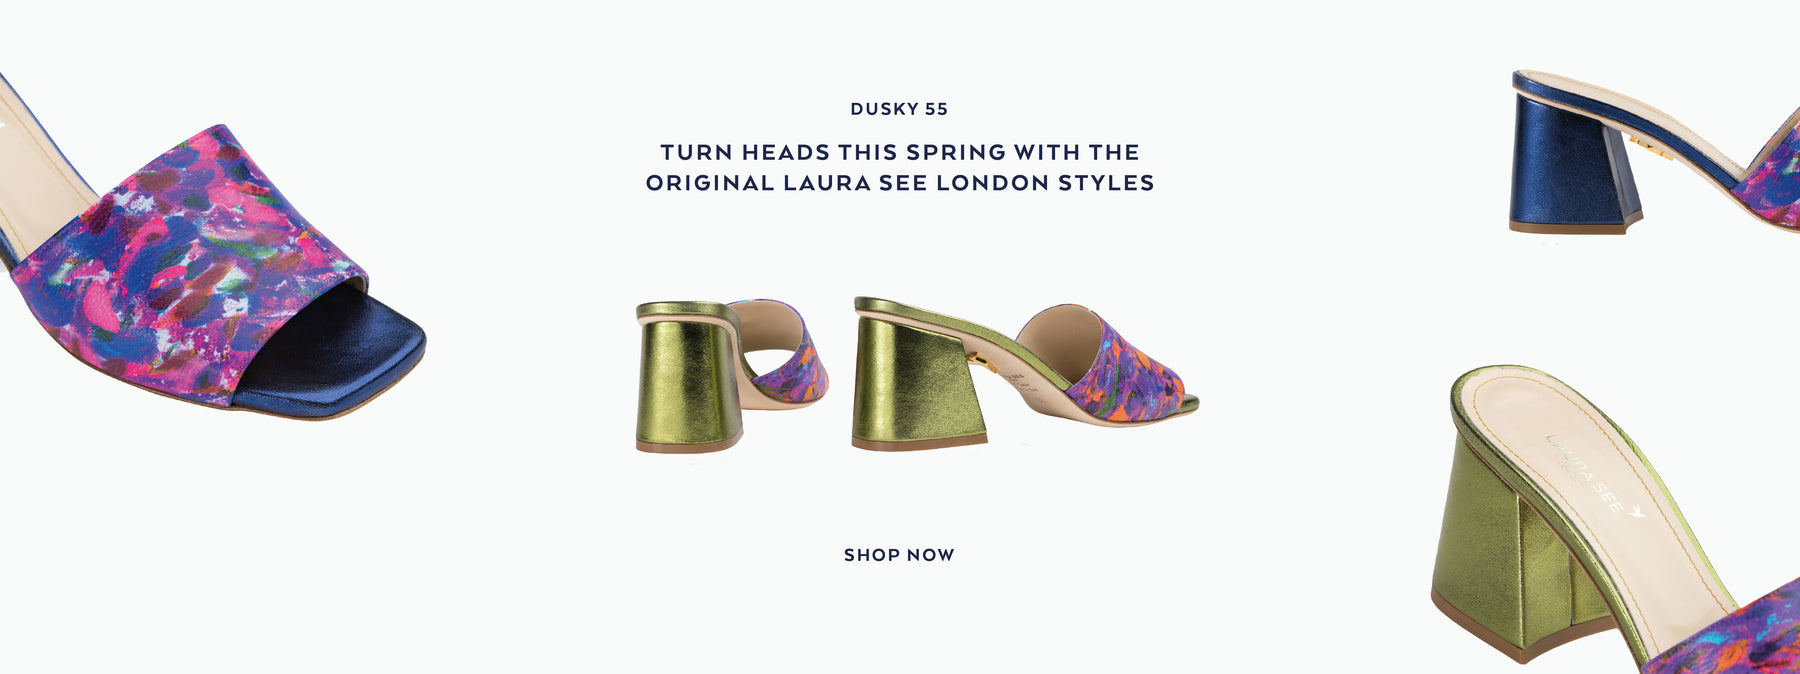 DUSKY MULE IN KHAKI AND BLUE, PRINTED LEATHER, BLOCK HEELS, LAURA SEE LONDON ORIGINALS COLLECTION, PRINT, ARTWORK, DESIGNER MULES, SPRING SUMMER STYLE 